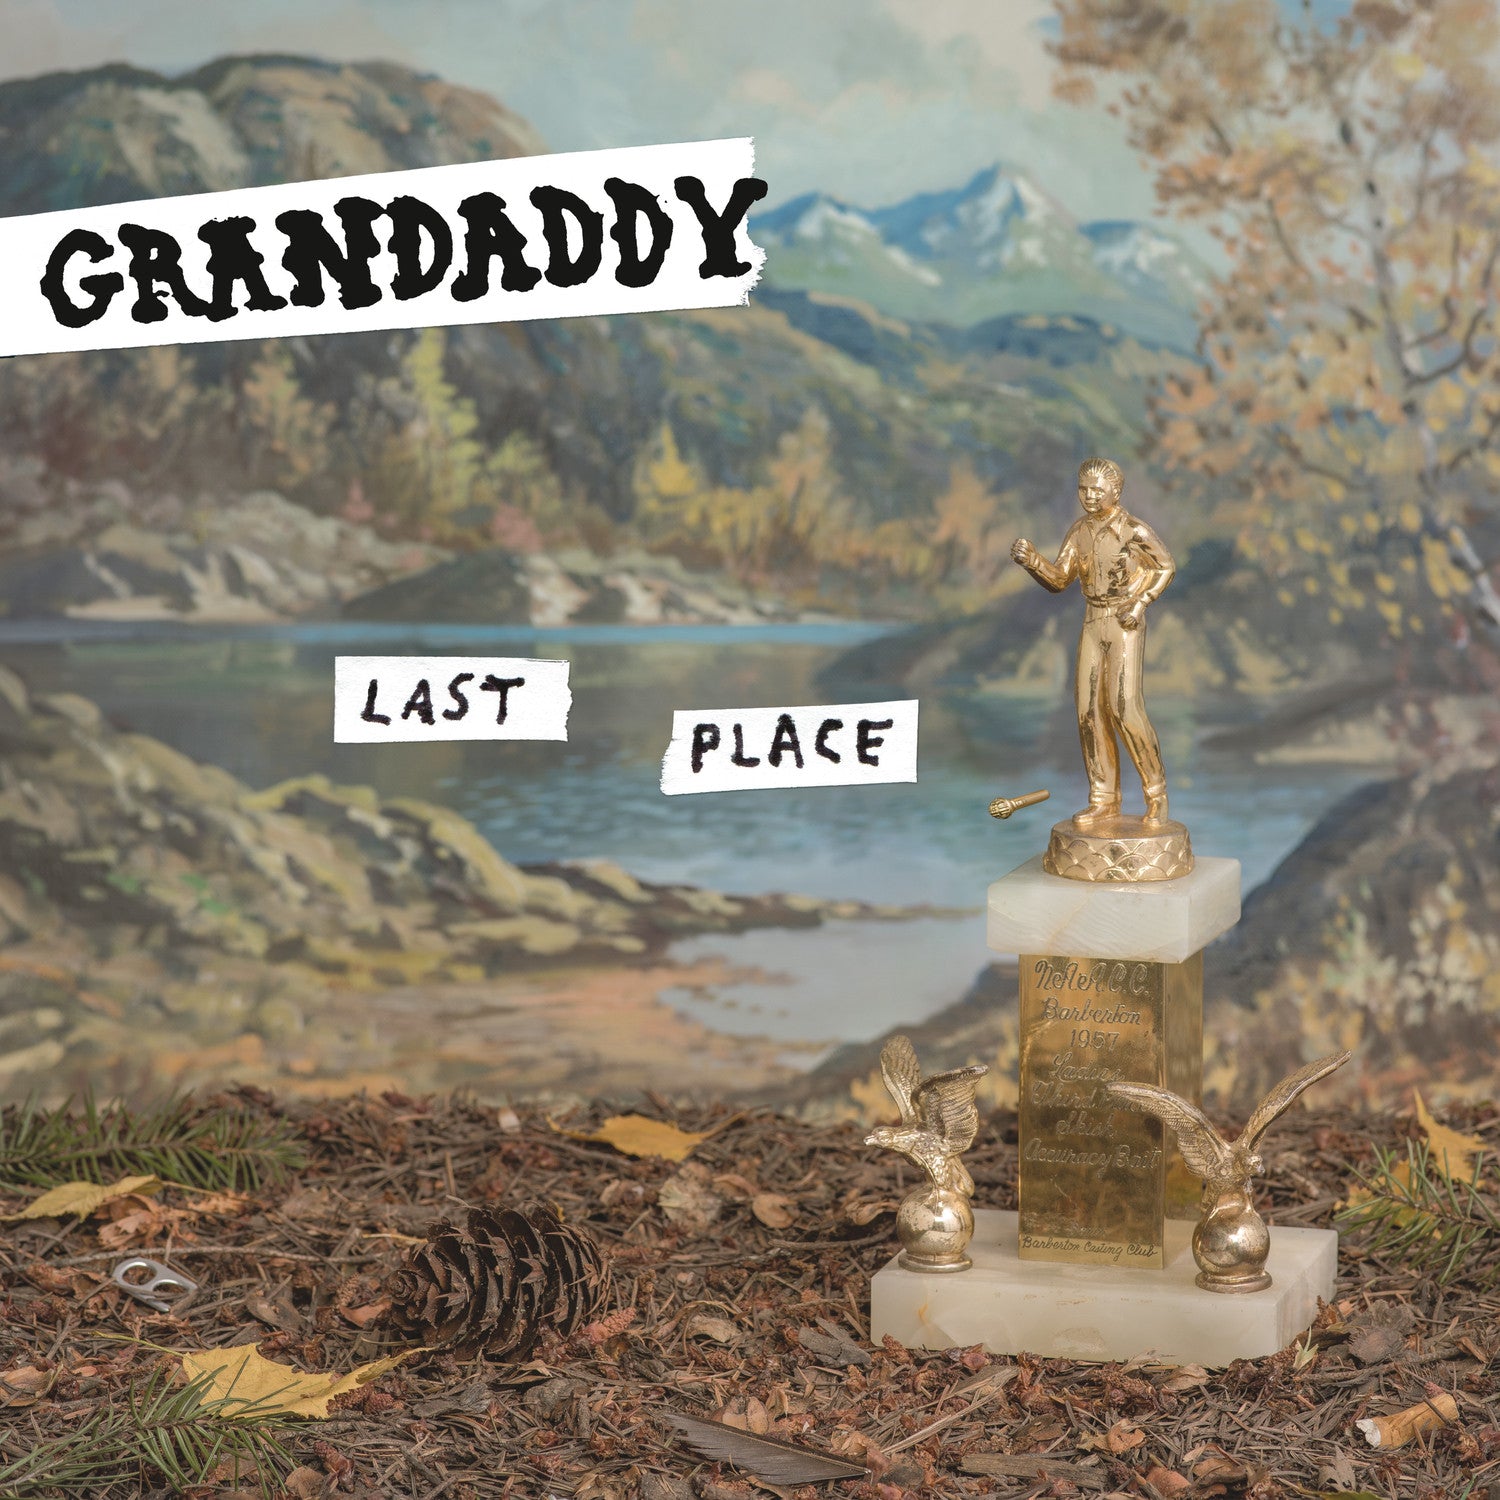 Grandaddy - Last Place - New Vinyl Record 2017 30th Century / Columbia Records Gatefold Colored Vinyl + Download - Indie Rock / Space Rock